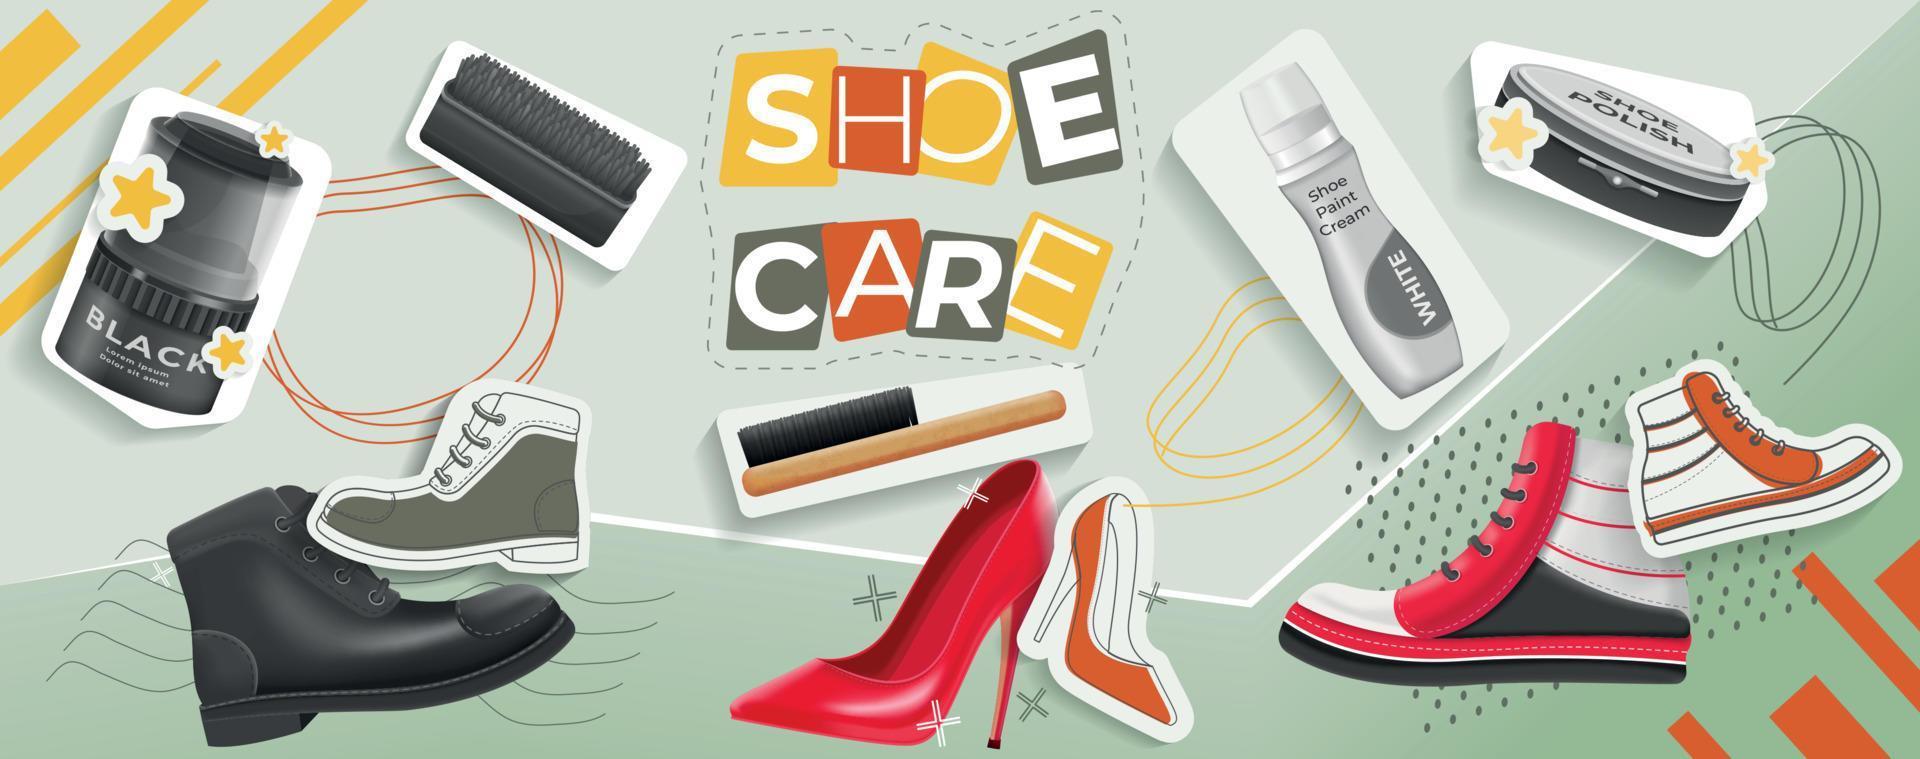 Shoe Care Collage vector